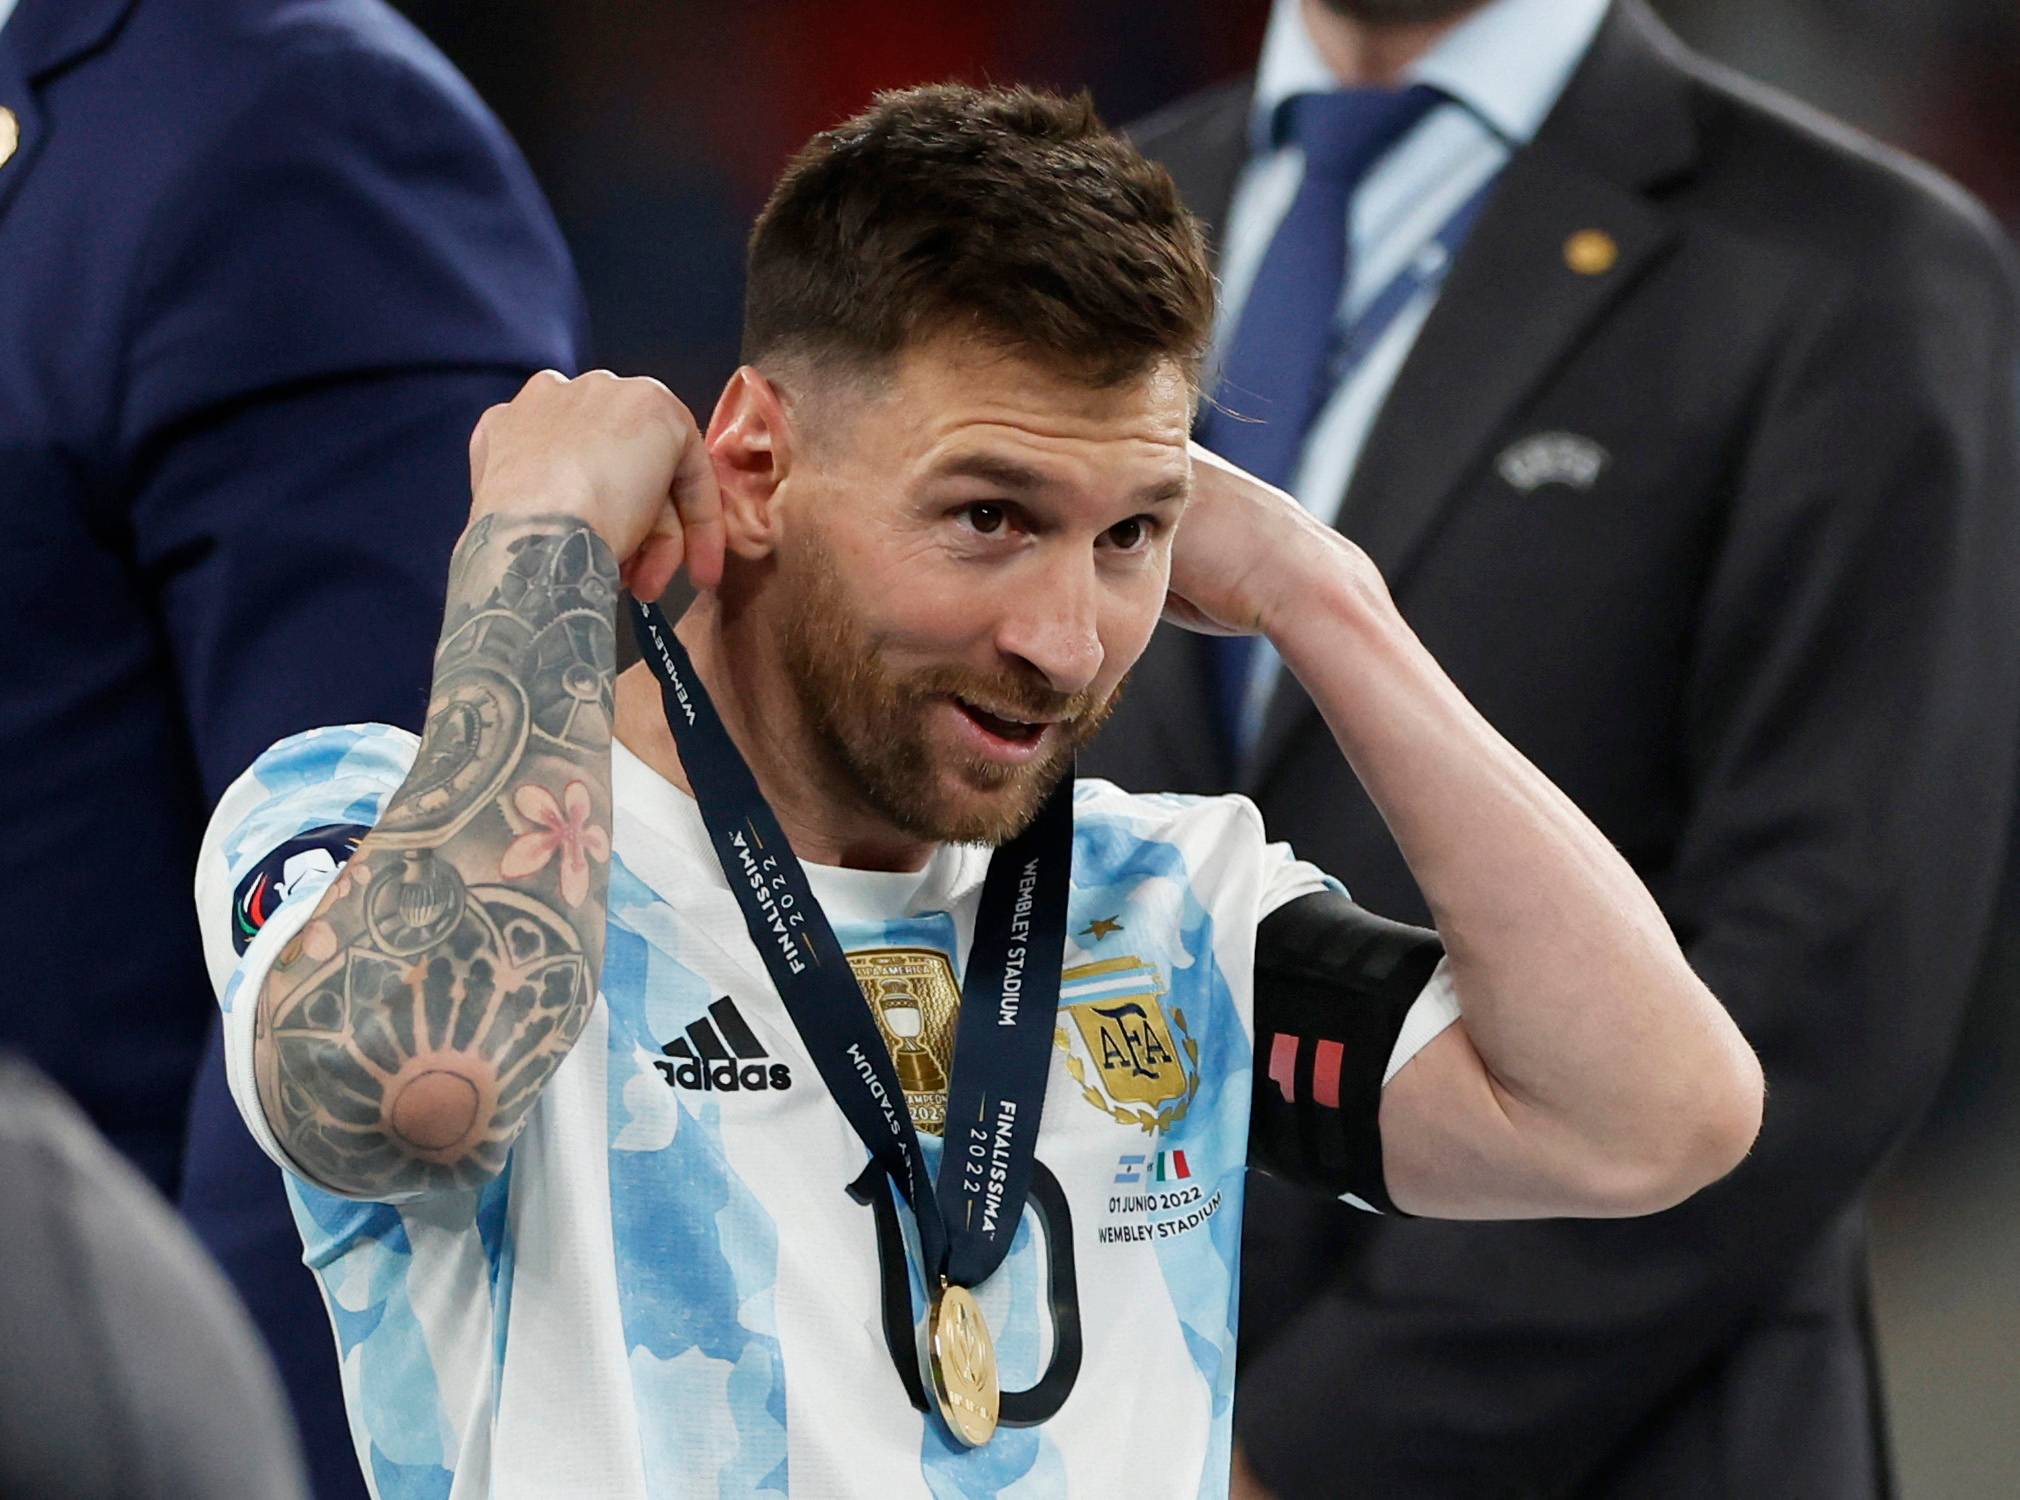 Messi puts on his medal.